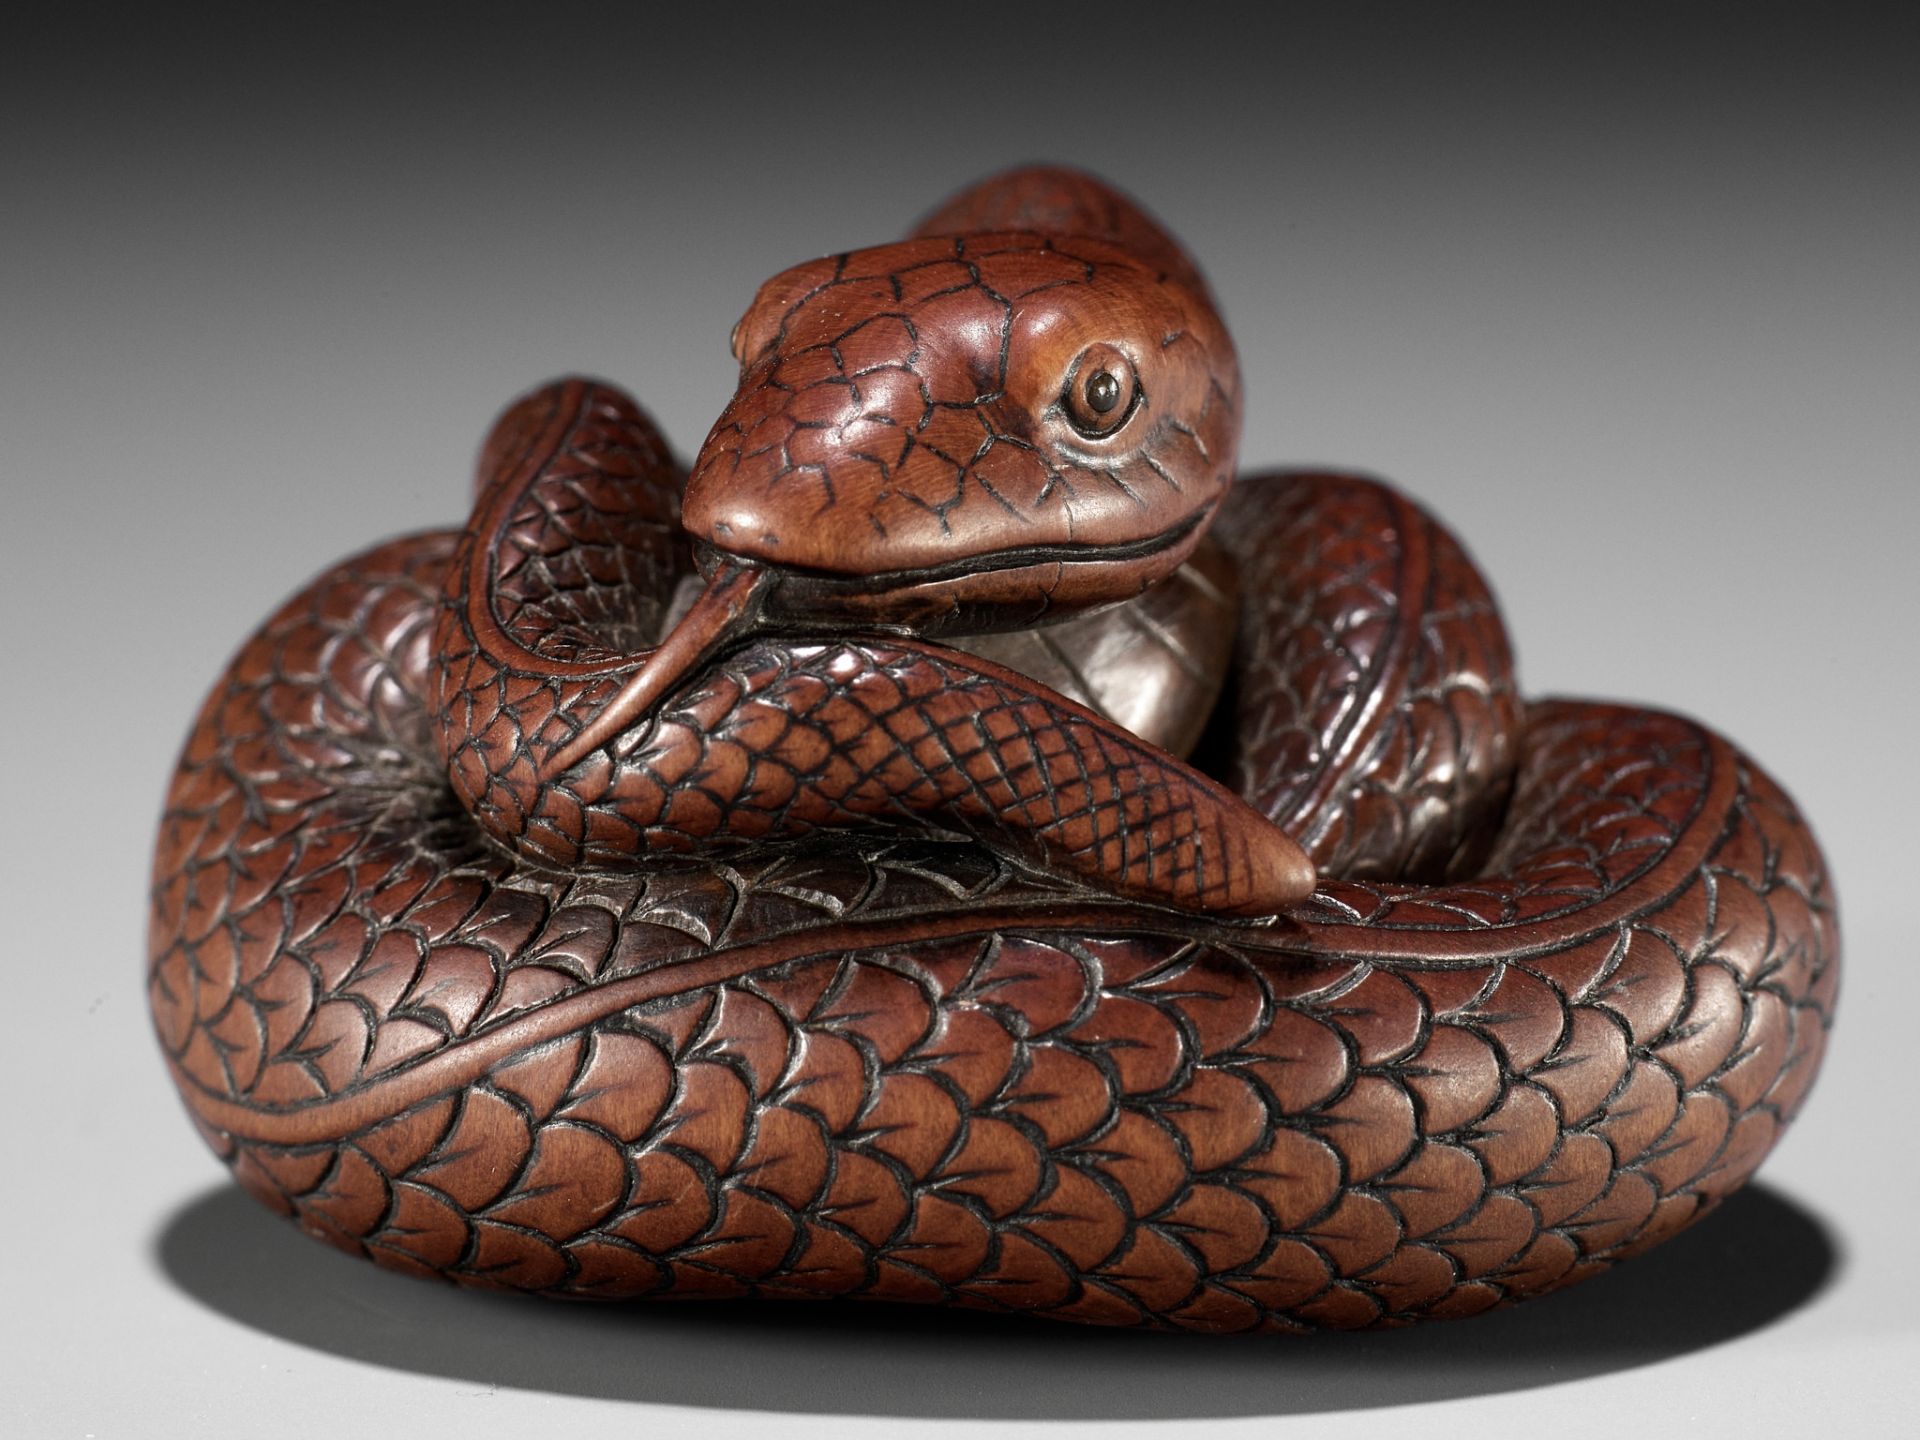 AN EXCEPTIONAL AND LARGE WOOD NETSUKE OF A SNAKE, ATTRIBUTED TO OKATOMO - Image 18 of 19